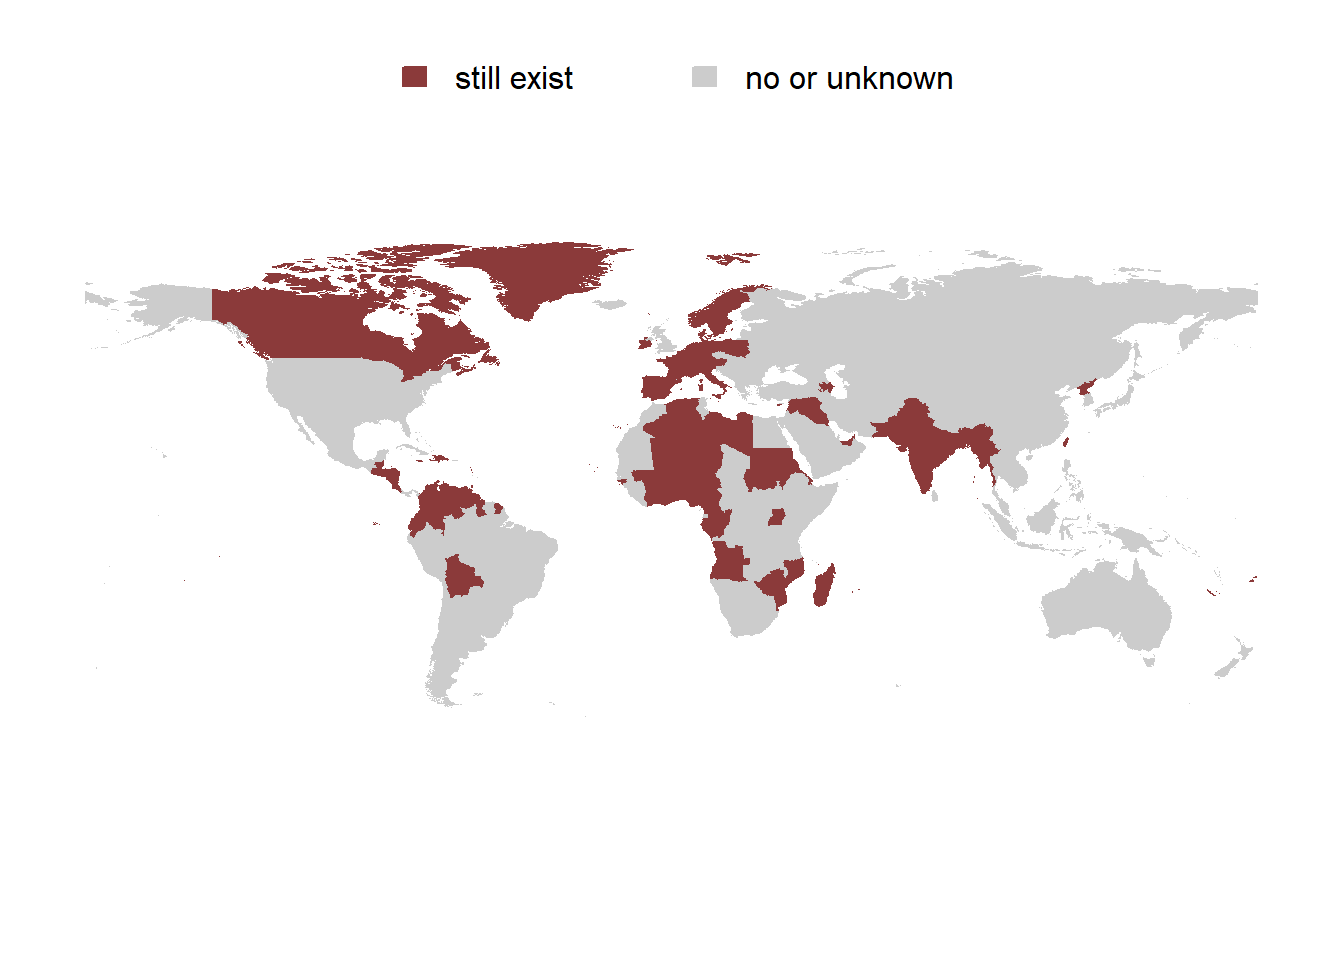 Countries that are still using rent control